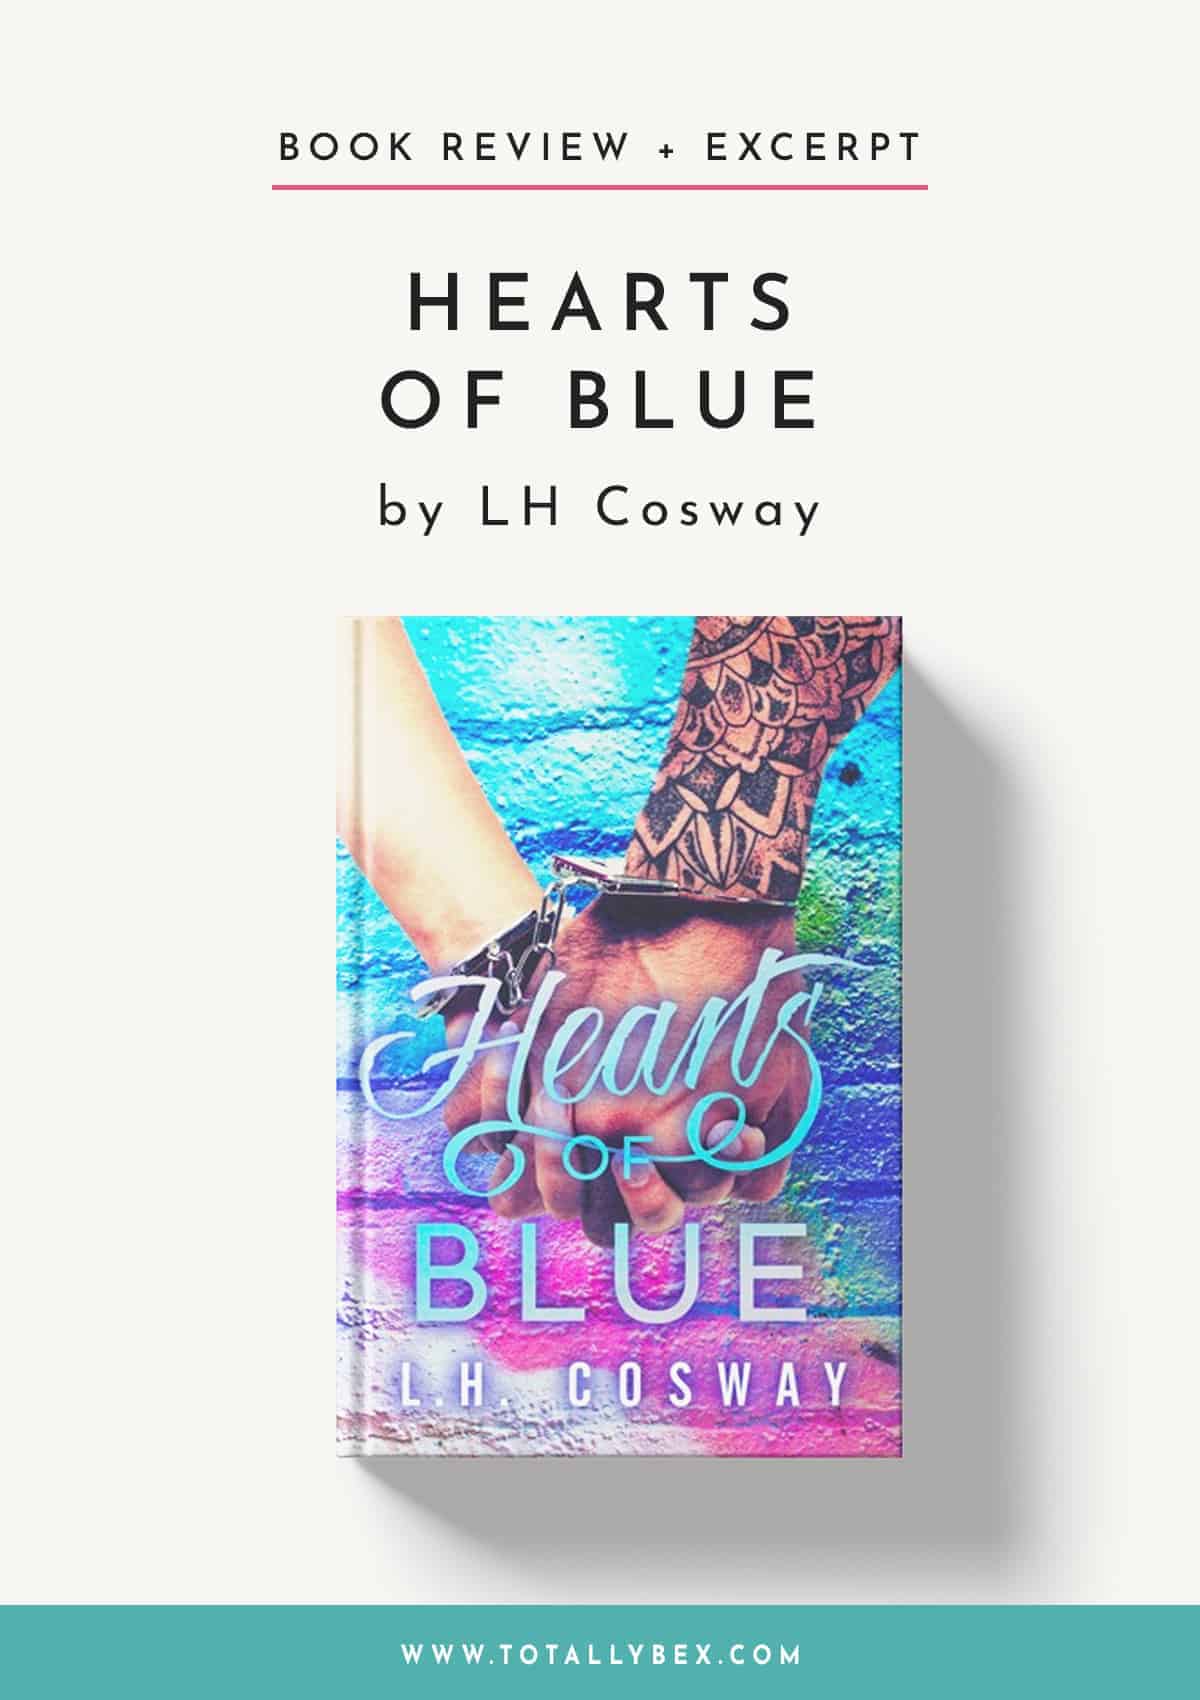 Hearts of Blue by LH Cosway-BookReview+Excerpt